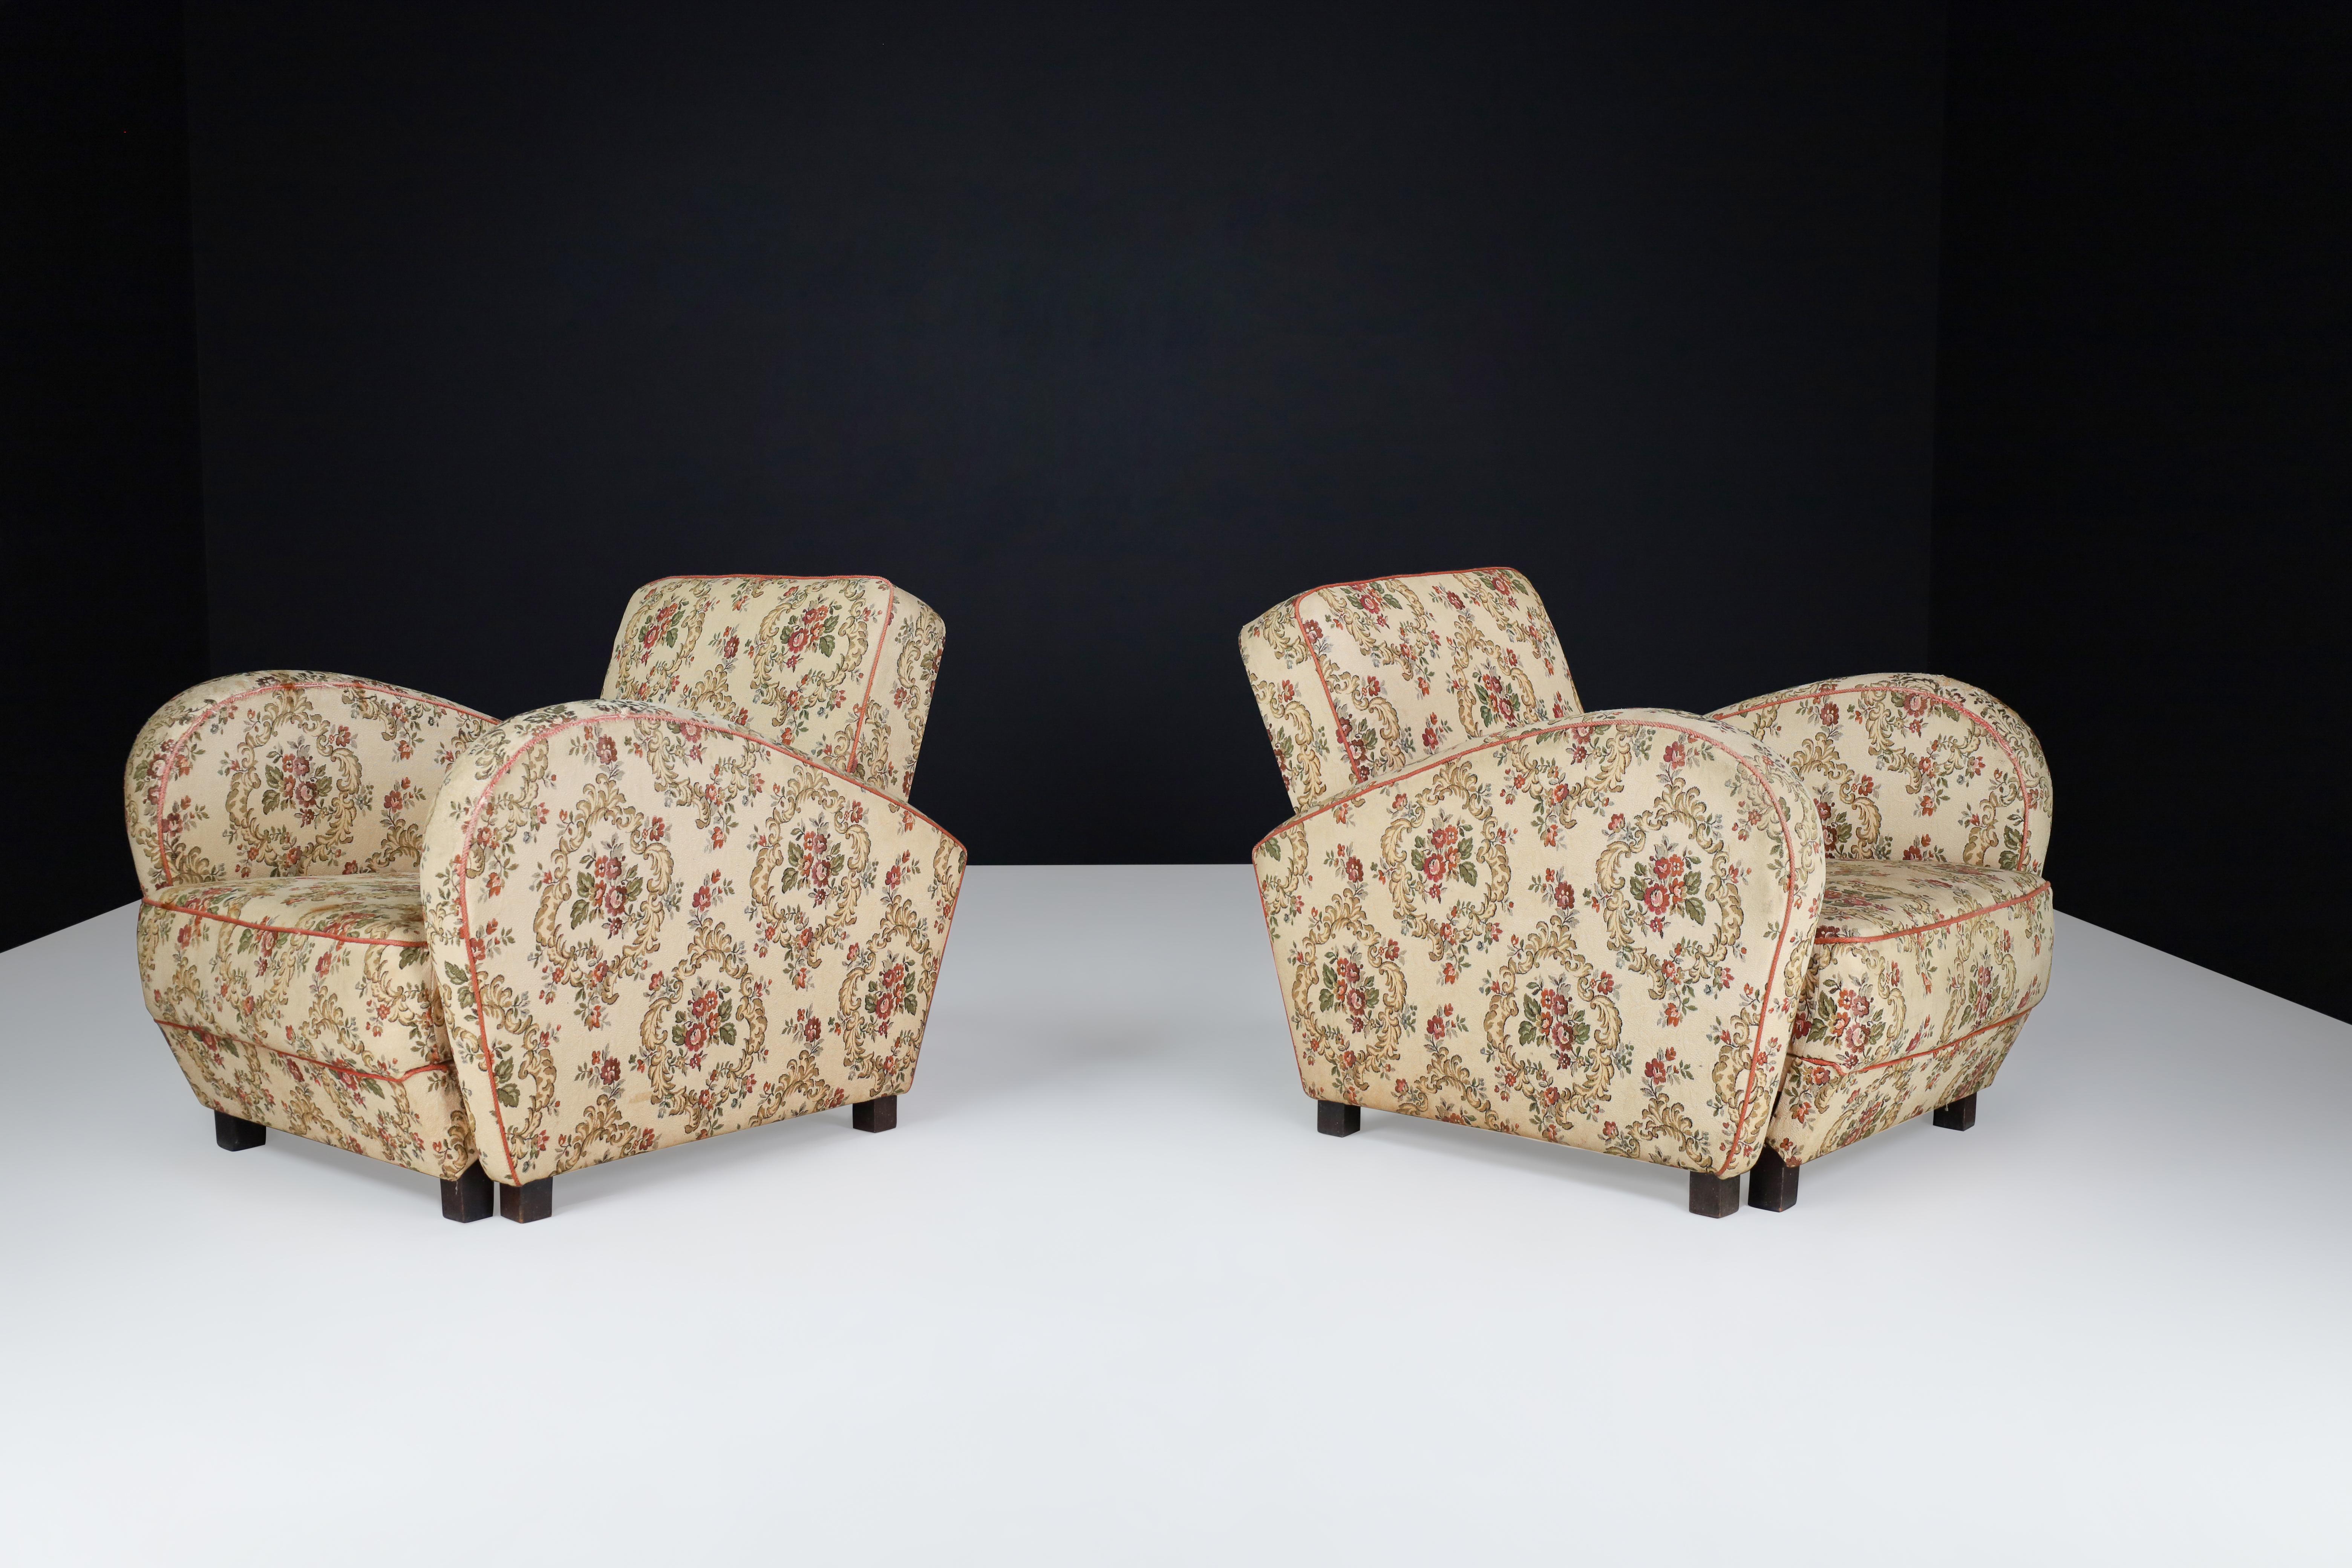 Czech Jindrich Halabala Art Deco Lounge Chairs in Floral Upholstery For Sale